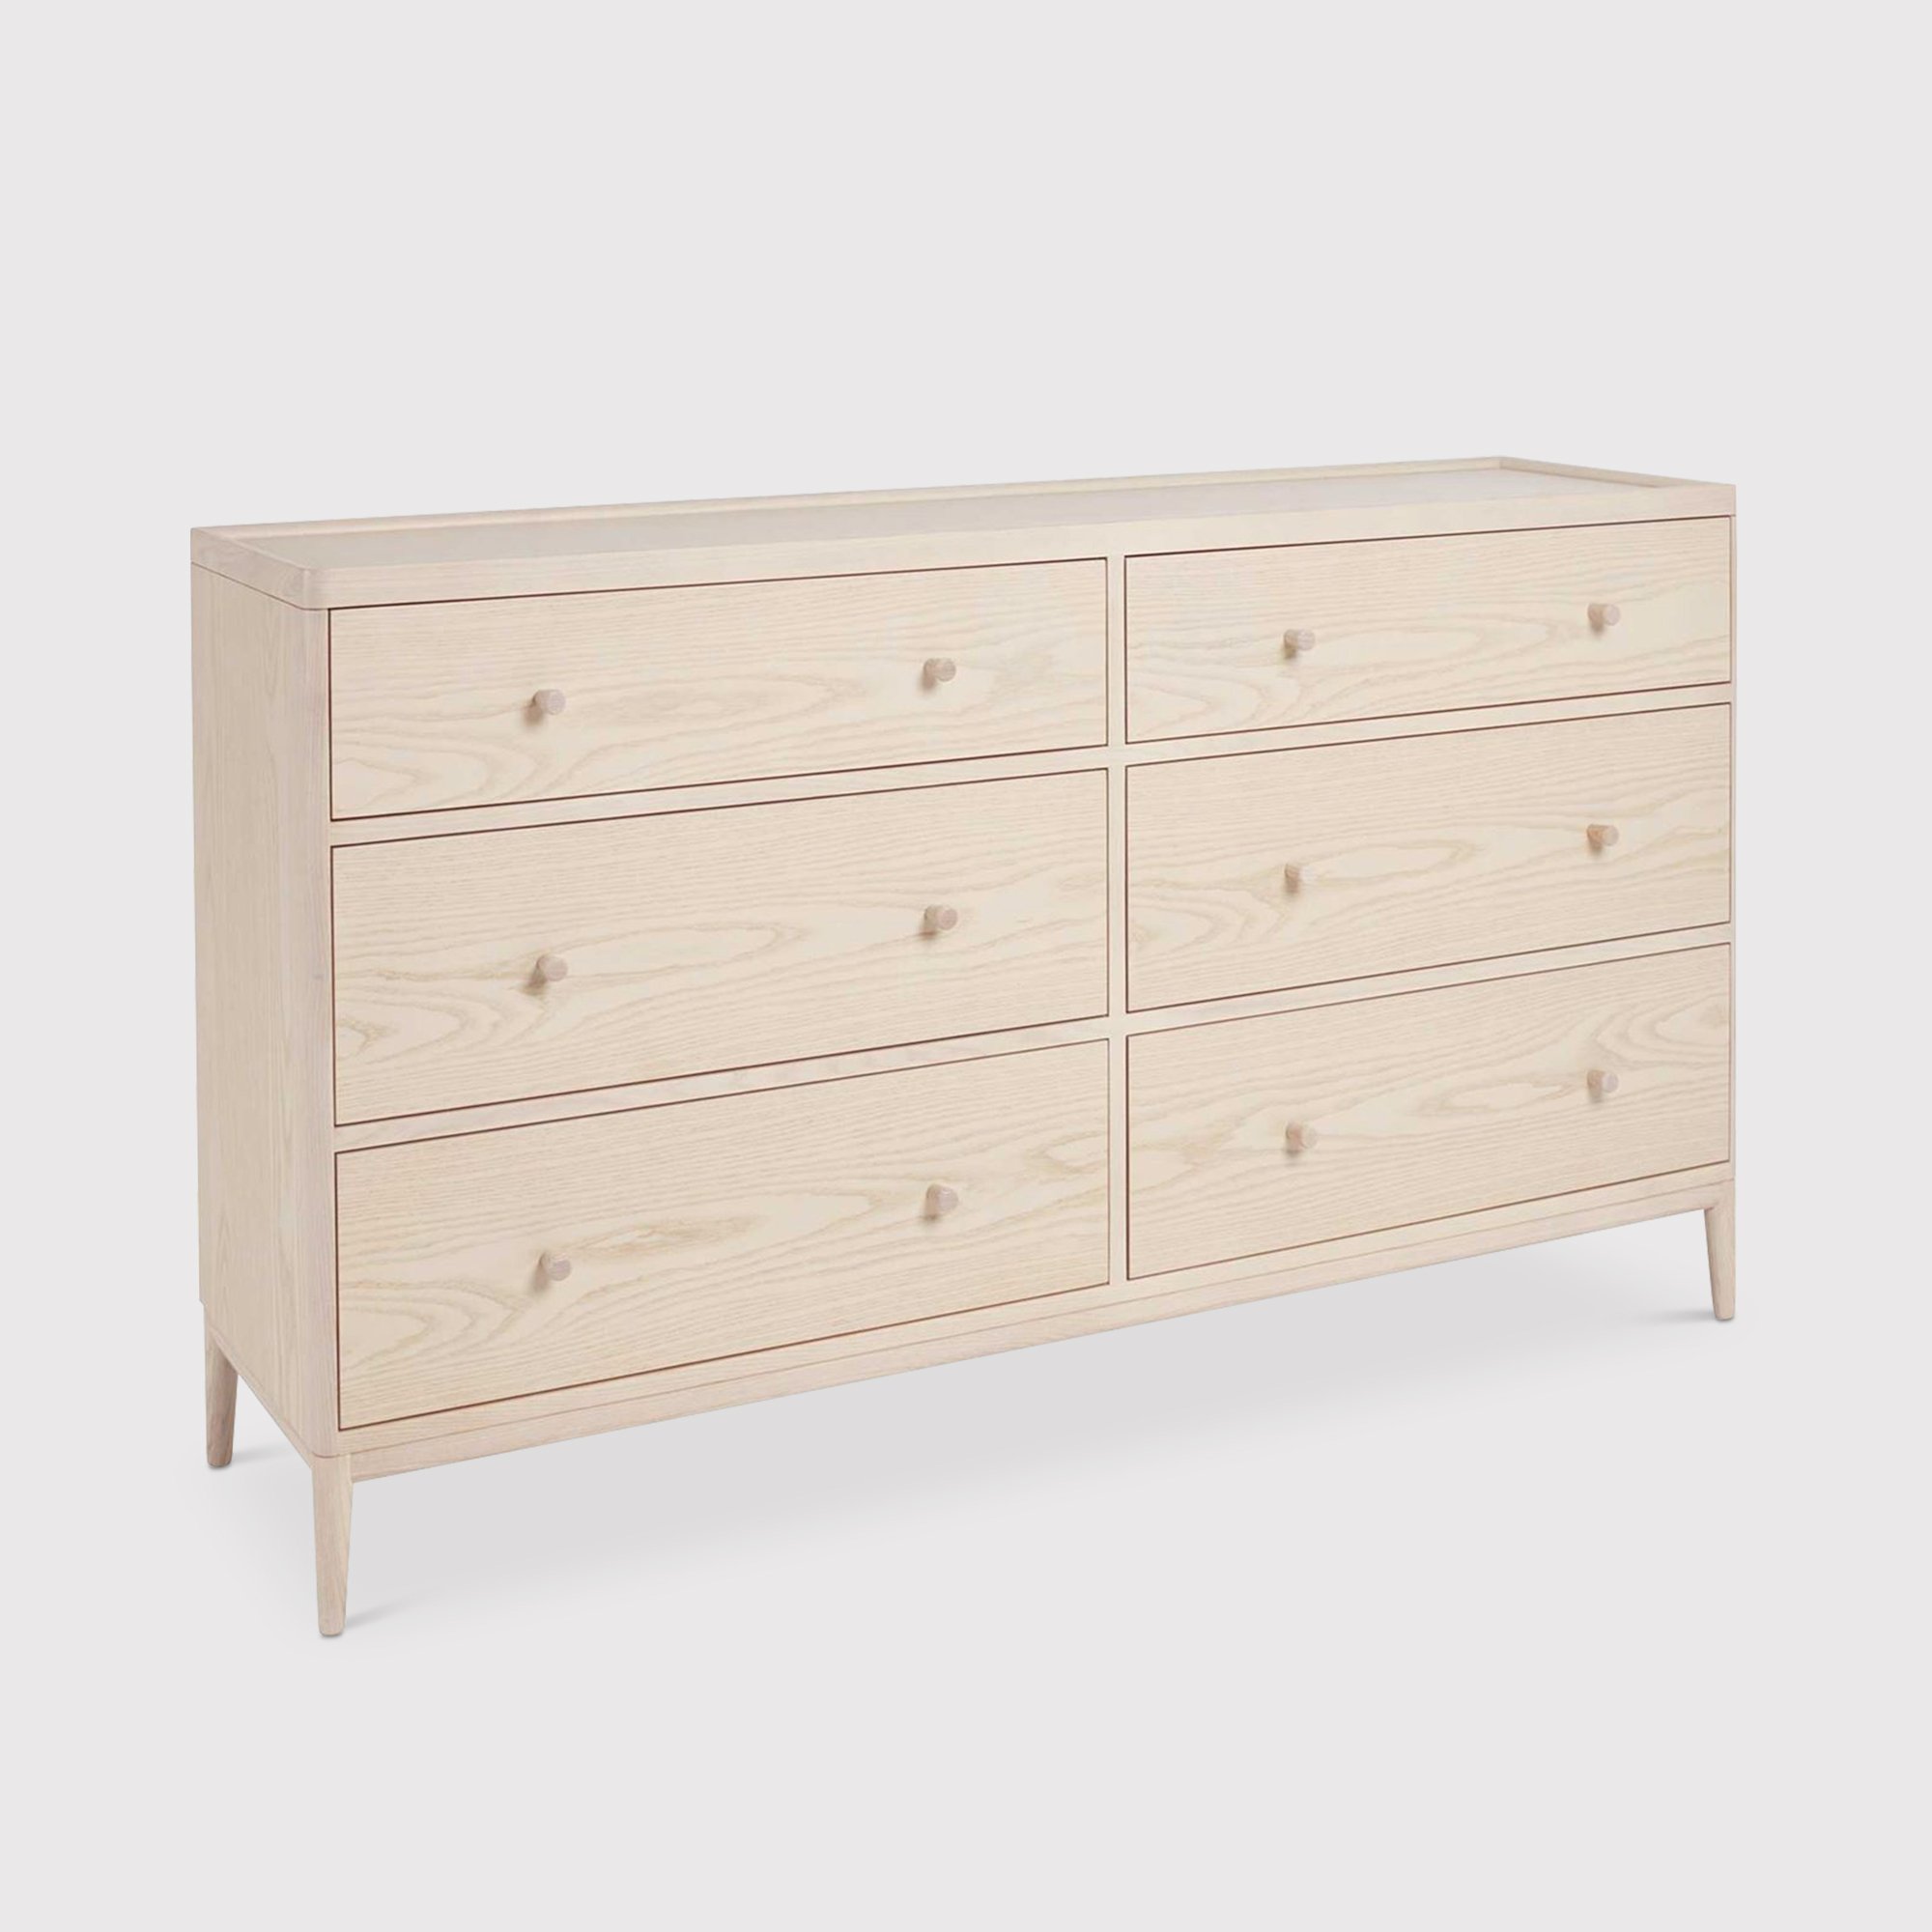 Ercol Salina 6 Drawer Wide Chest | Barker & Stonehouse